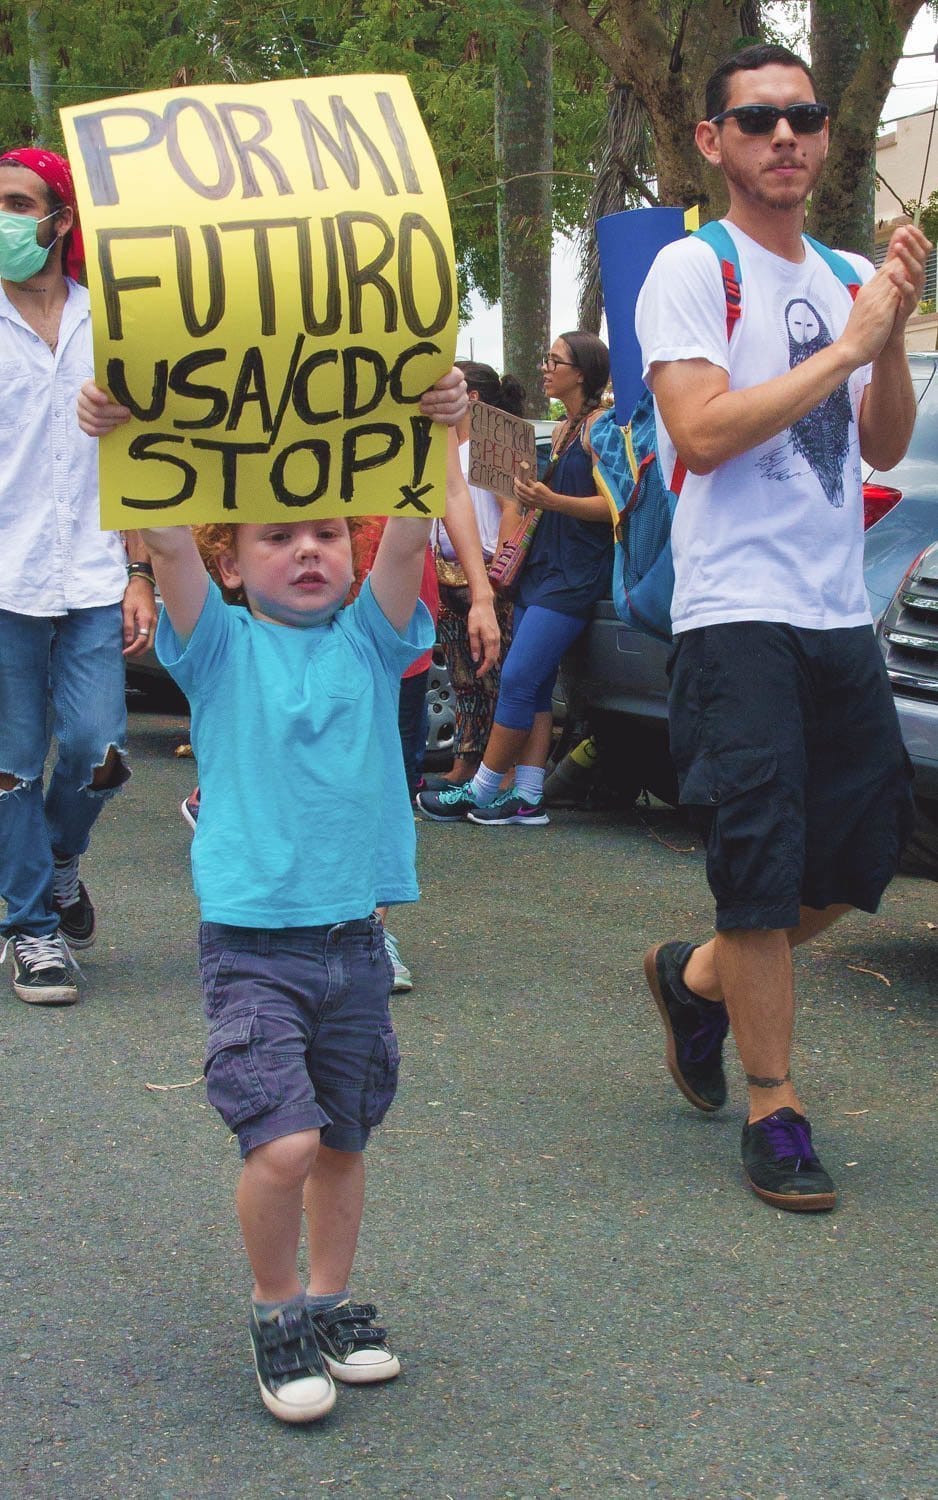 [For his Future Please CDC and the Federal Government Stop! ]T